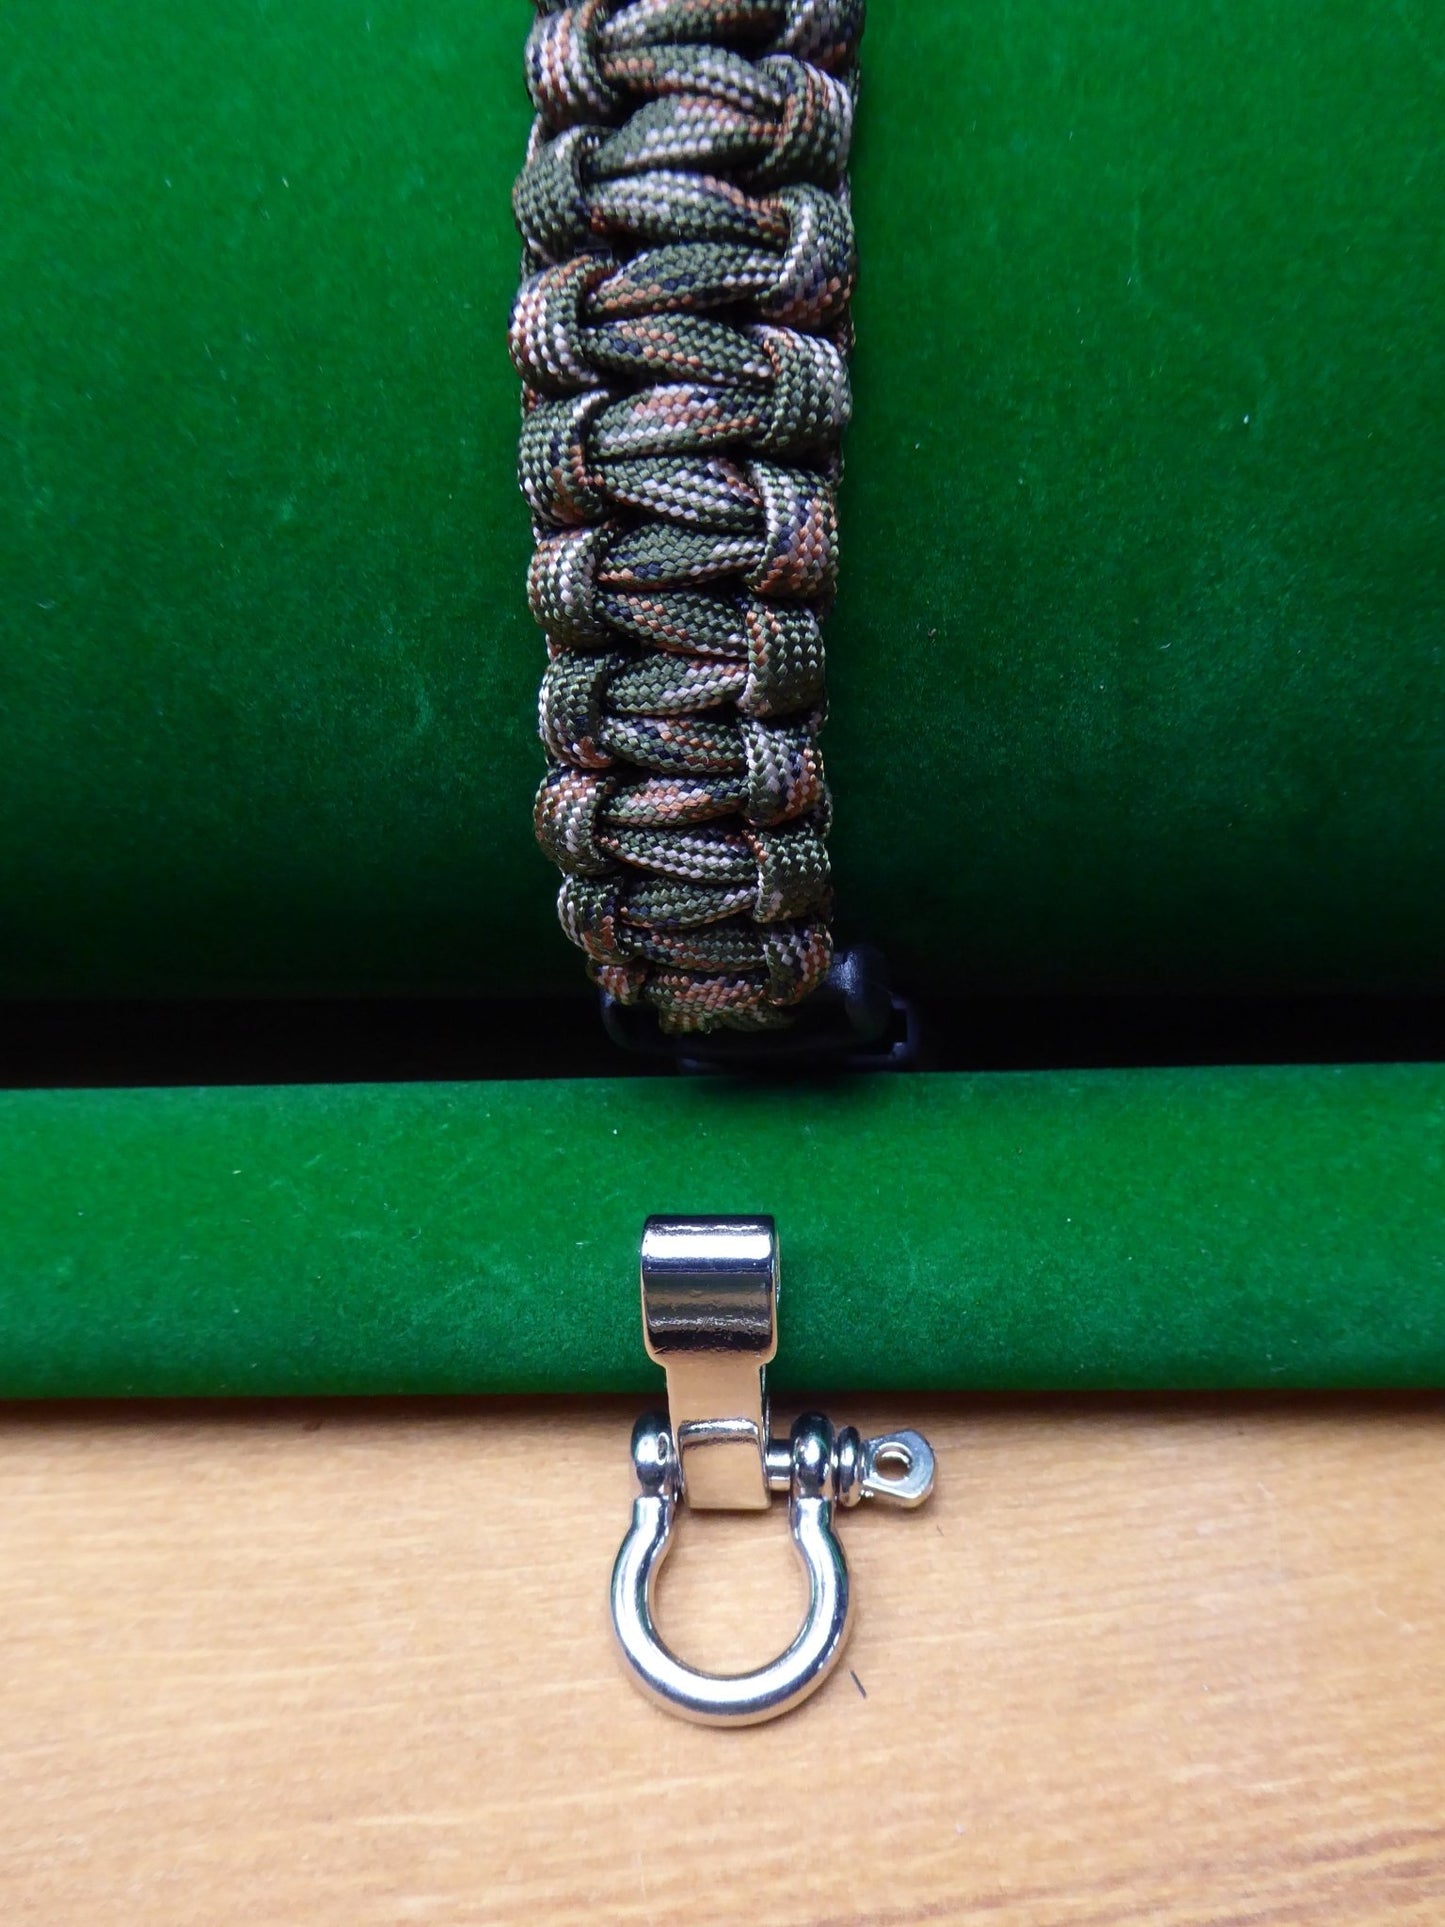 Paracord Buckle Bracelet kits with choice of colours Paracord Huggins Attic Green Camo Silver look buckle  [Huggins attic]